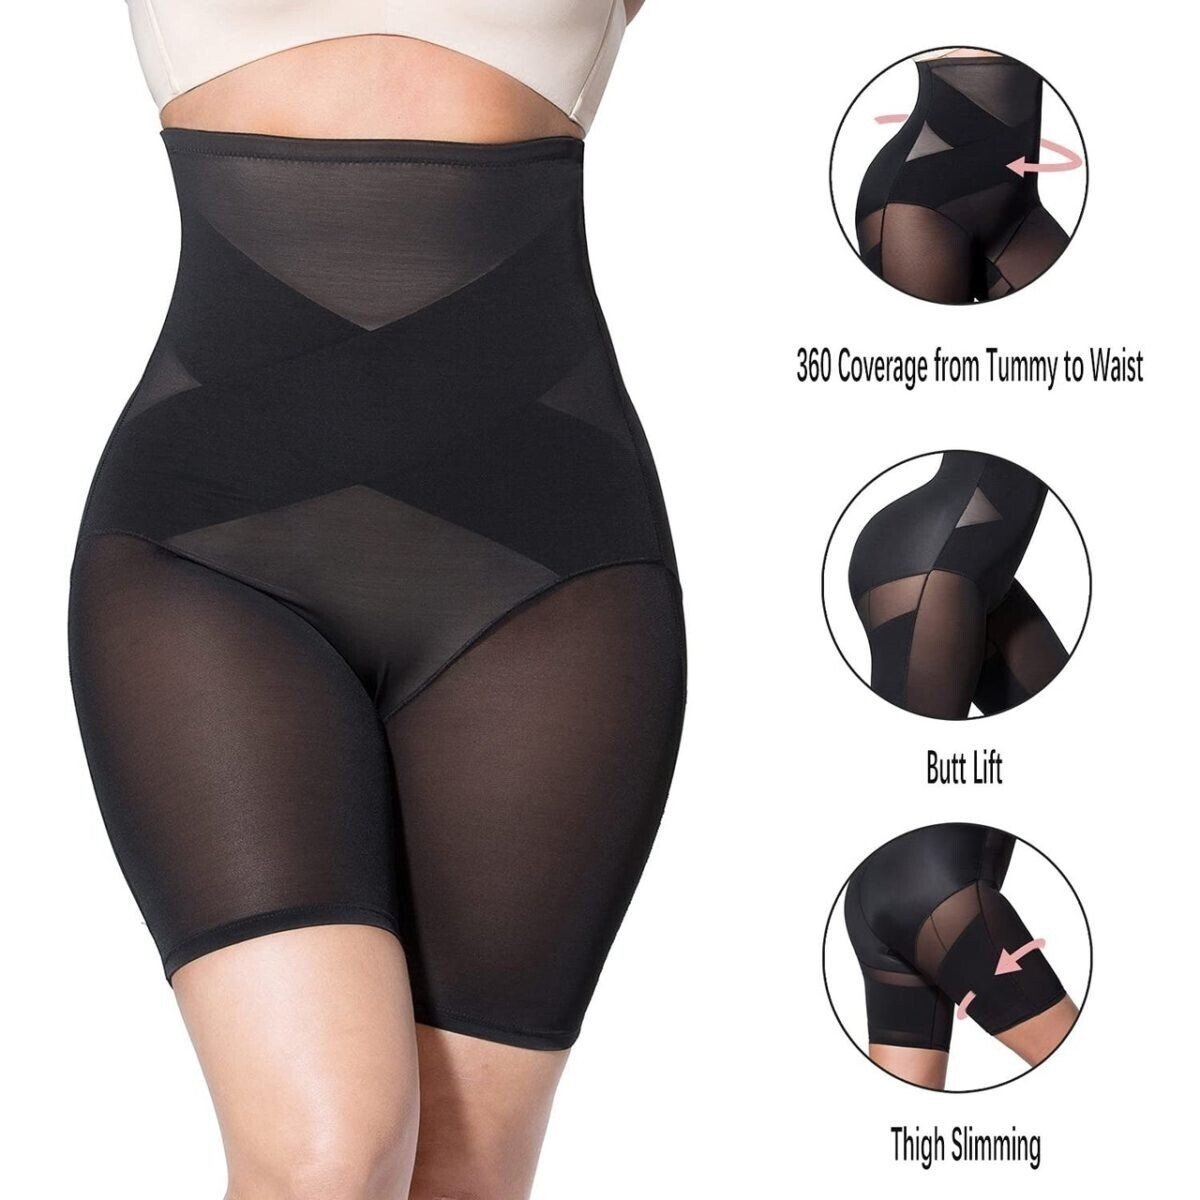 Get a Perfect Figure with Our Cross-Compression High Waisted Shaper - 49% Off for Summer Sale!